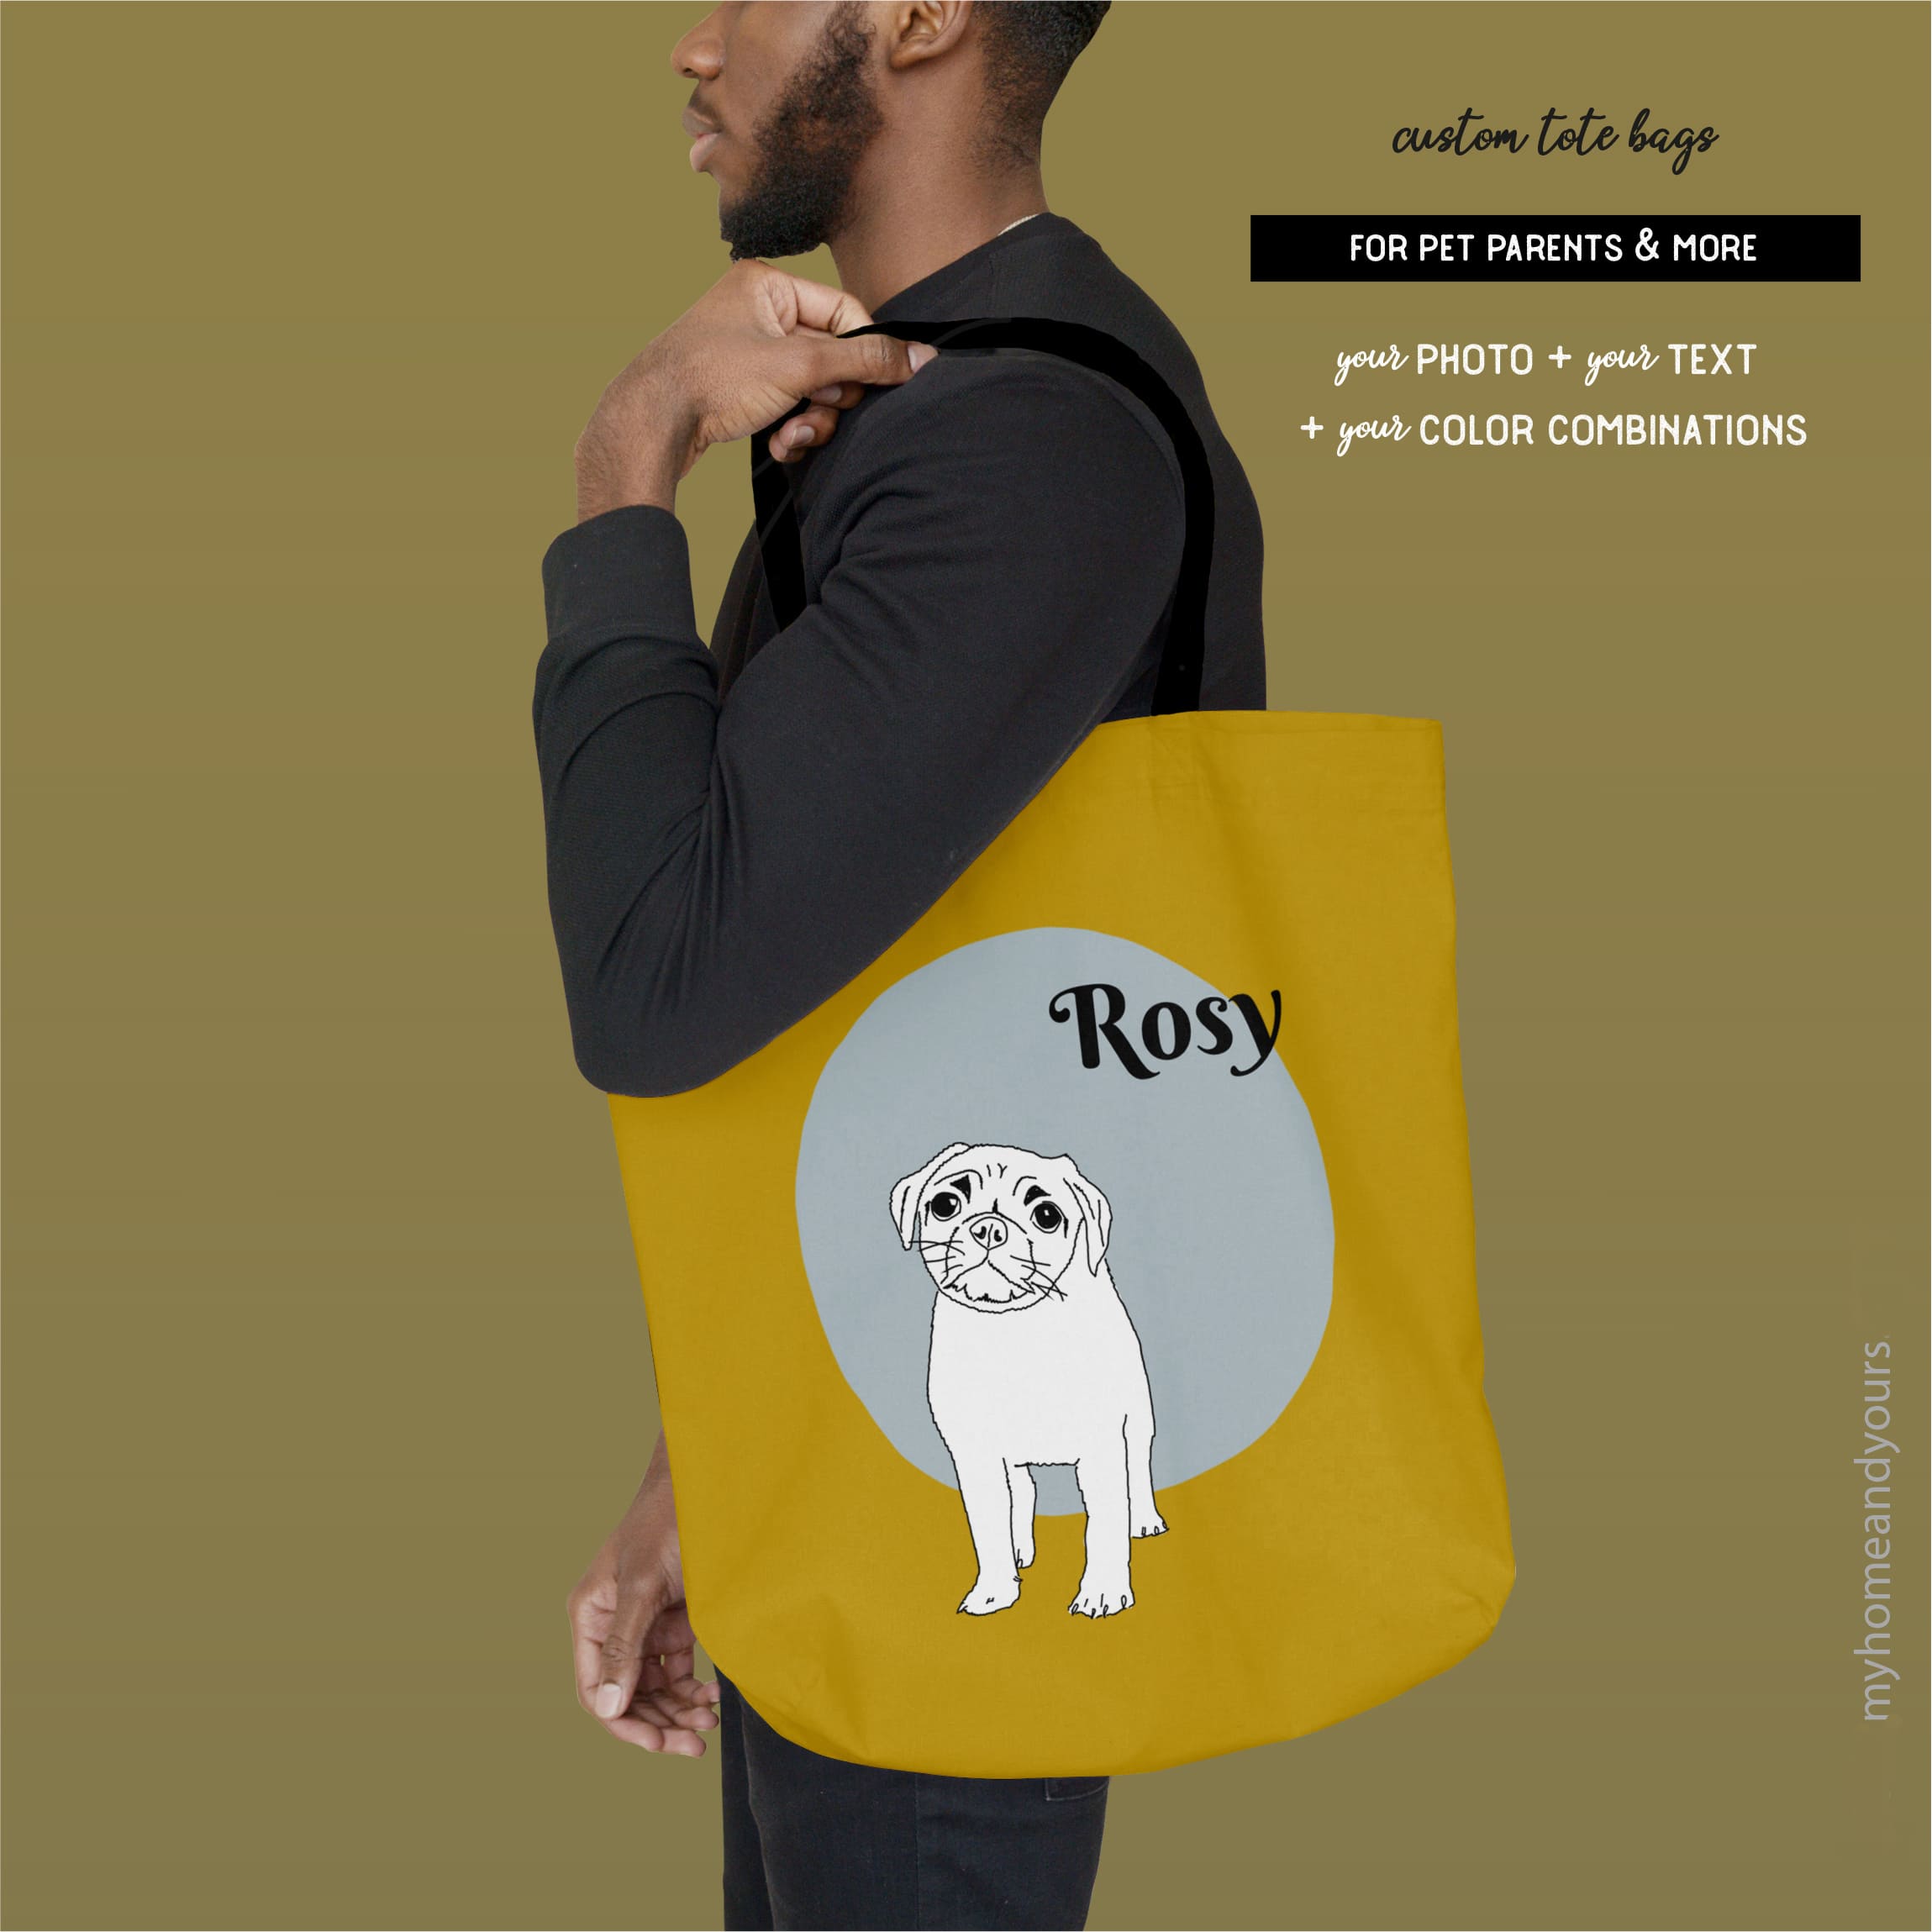 Custom line art portrait illustration of your dog on a quality tote bag for men or women with fashionable color blocking back ground or terrazzo pattern